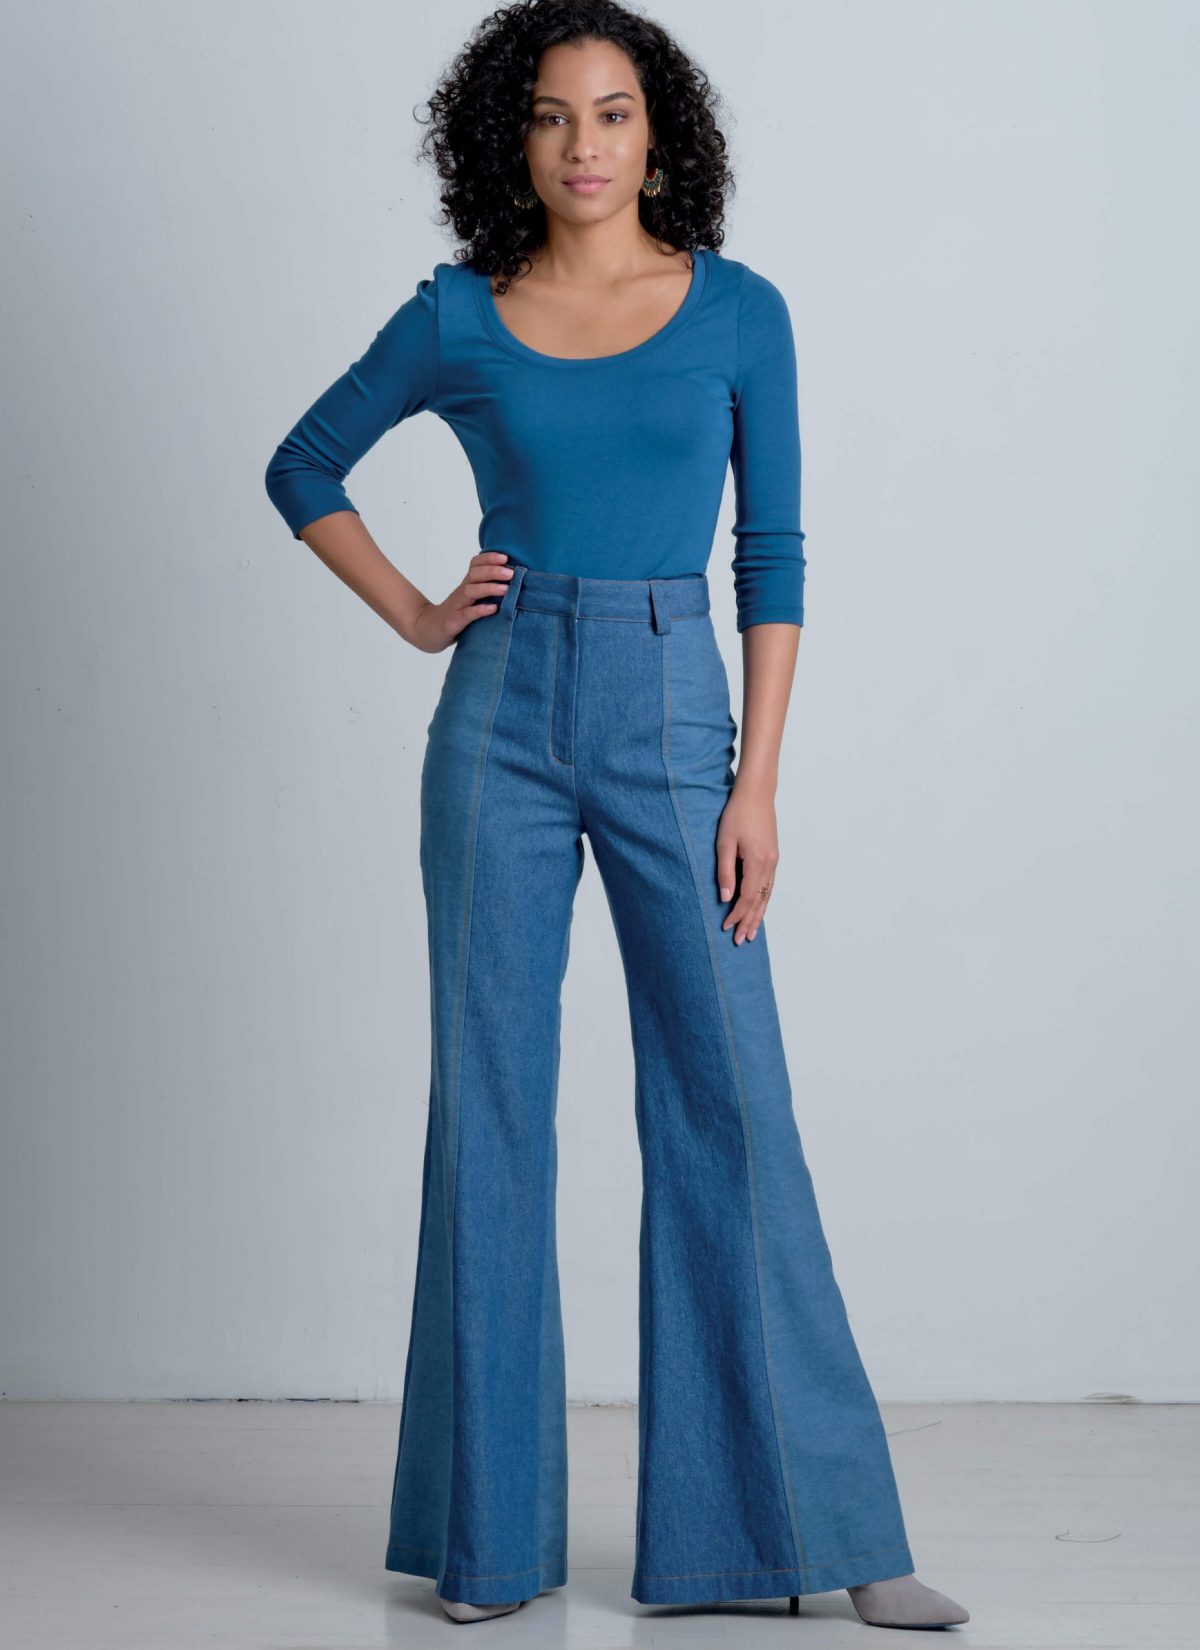 McCall's Sewing Pattern M8007 Misses' Trousers